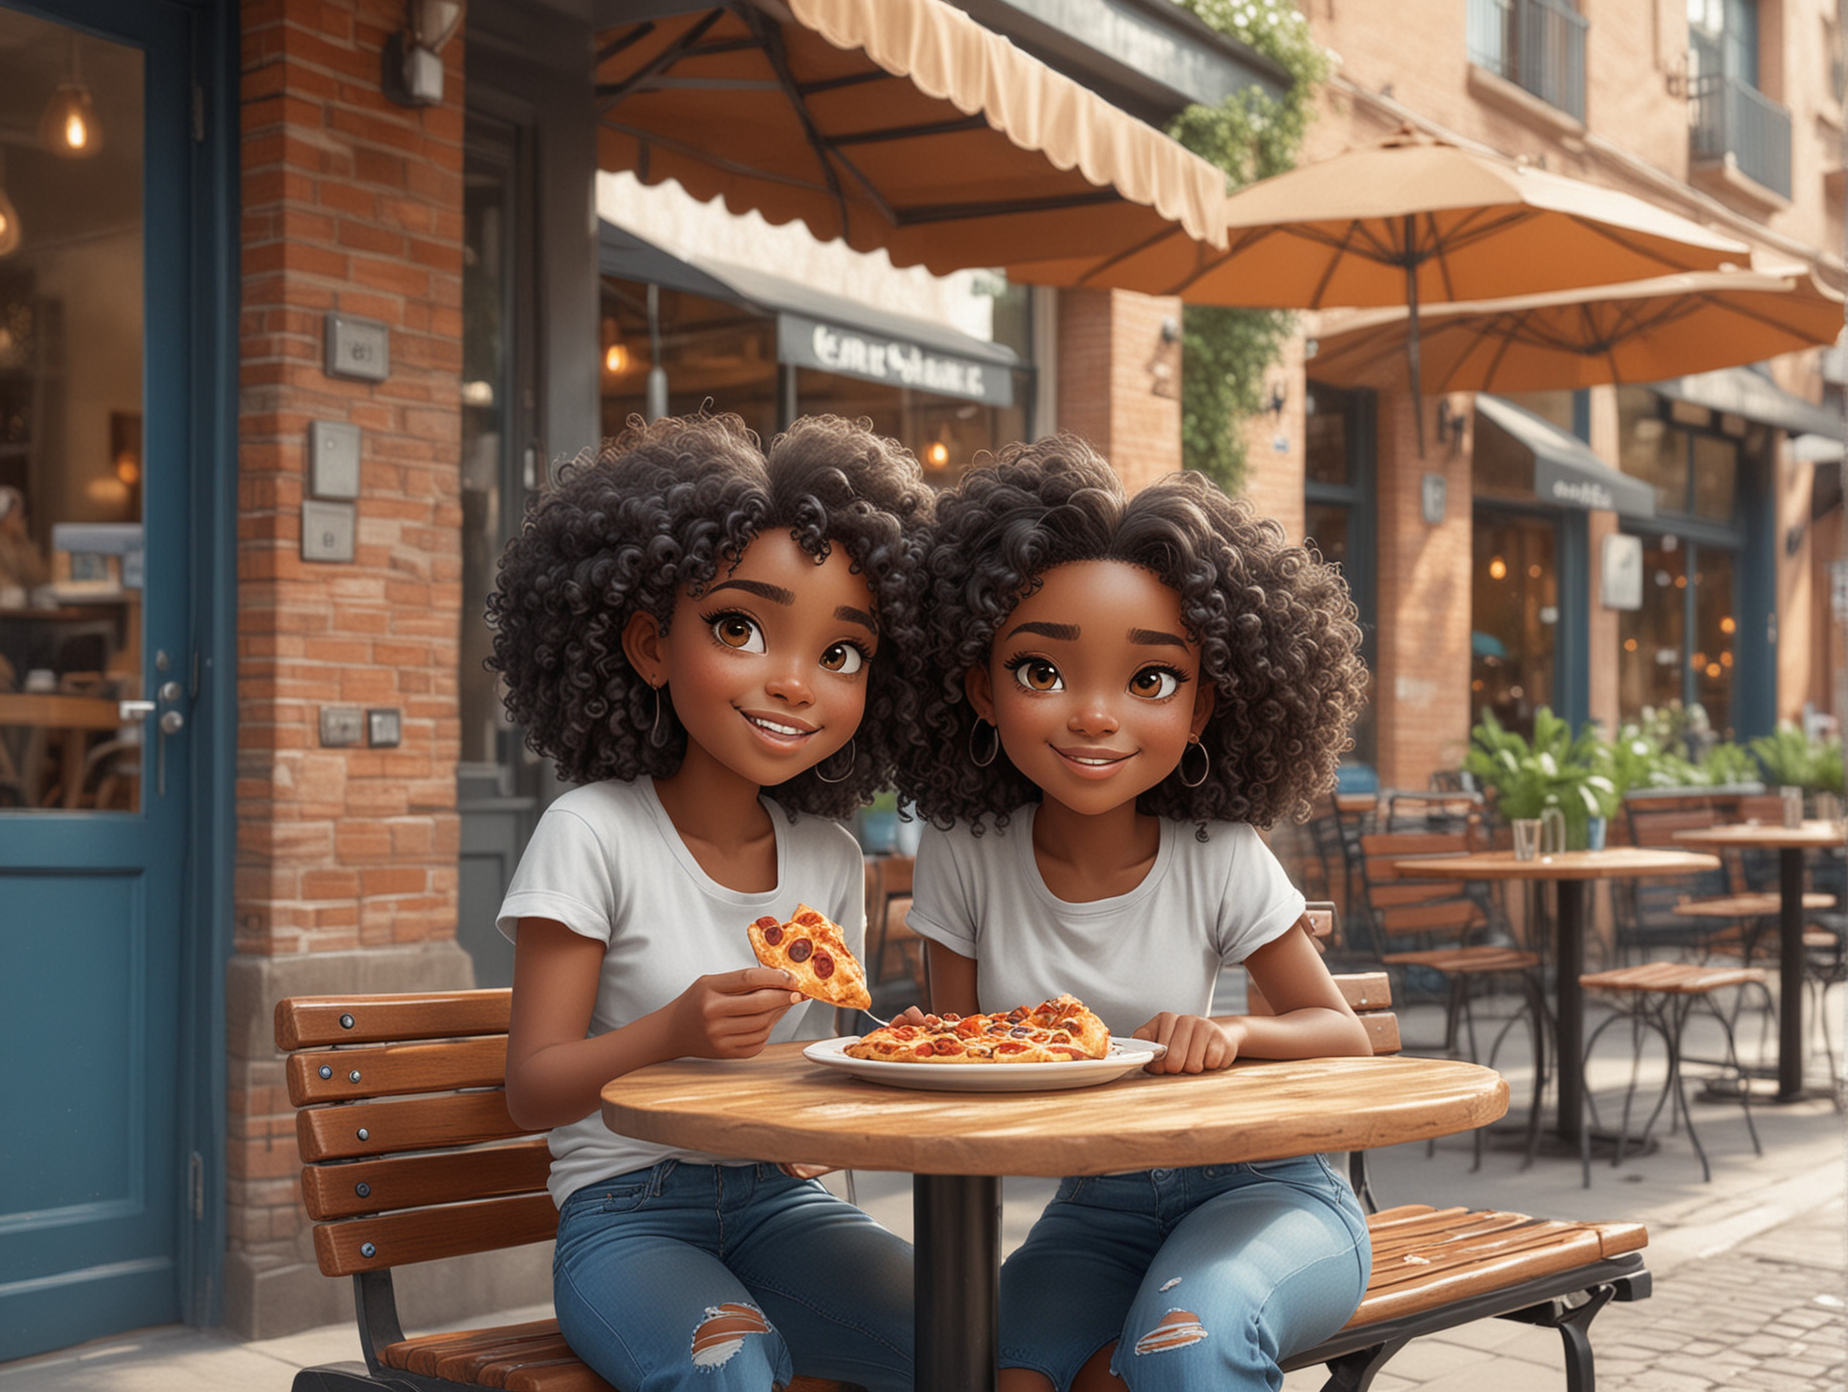 Create a 8k airbrush oil painting of a chibi-proportioned African American woman sitting under an umbrella at a restaurant on a beautiful sunny day. She has voluminous, curly black hair framing her face, with large expressive eyes and long eyelashes. The character is holding a slice of pizza with both hands, close to her mouth as if she's about to take a sip. She wears a casual, stylish outfit consisting of a short-sleeved, round-neck grey T-shirt and high-waisted blue jeans with subtle white distress marks and classic heels..The jeans have a prominent button and realistic seams.  The artwork has a 10x10 aspect ratio and is set against a background of blurred streetscape that suggests a quiet urban setting with greenery and cafe furniture. The overall color palette of the image is rich and vibrant, with an emphasis on blues and earth tones, giving a cozy, inviting atmosphere.  designed for clip art usage.